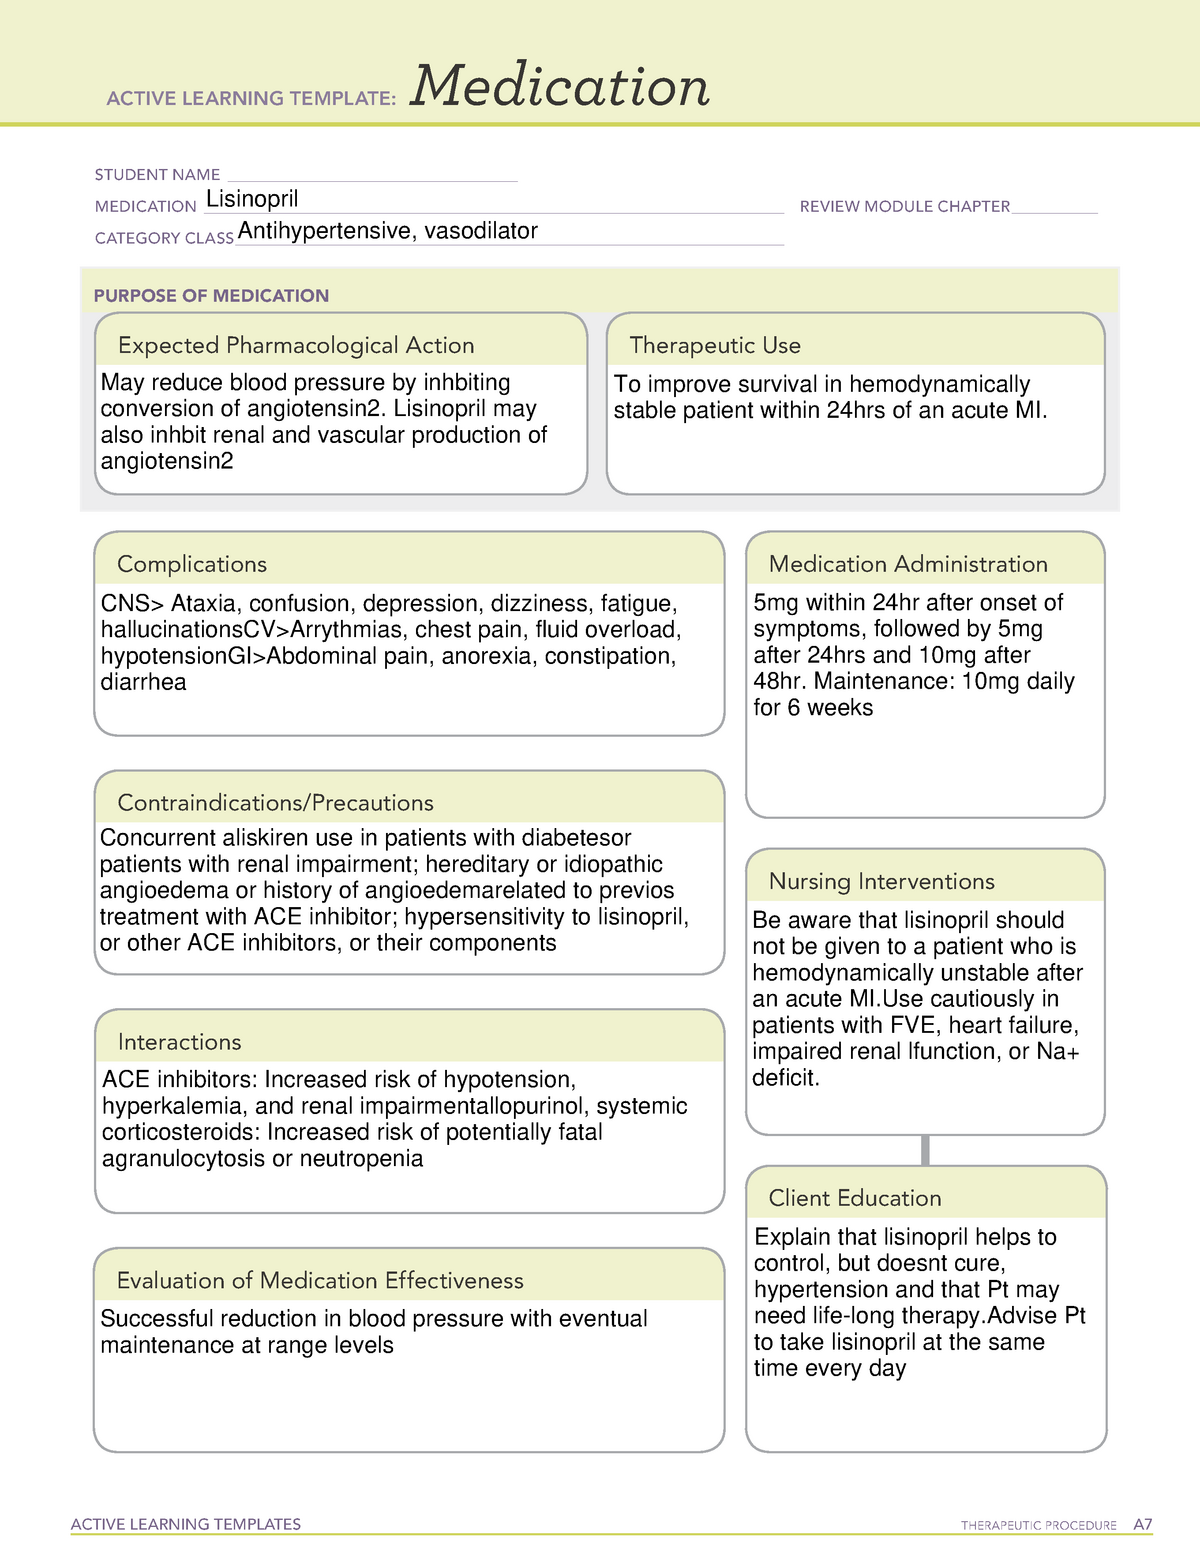 ALT medication lisinopril medication template and report ACTIVE